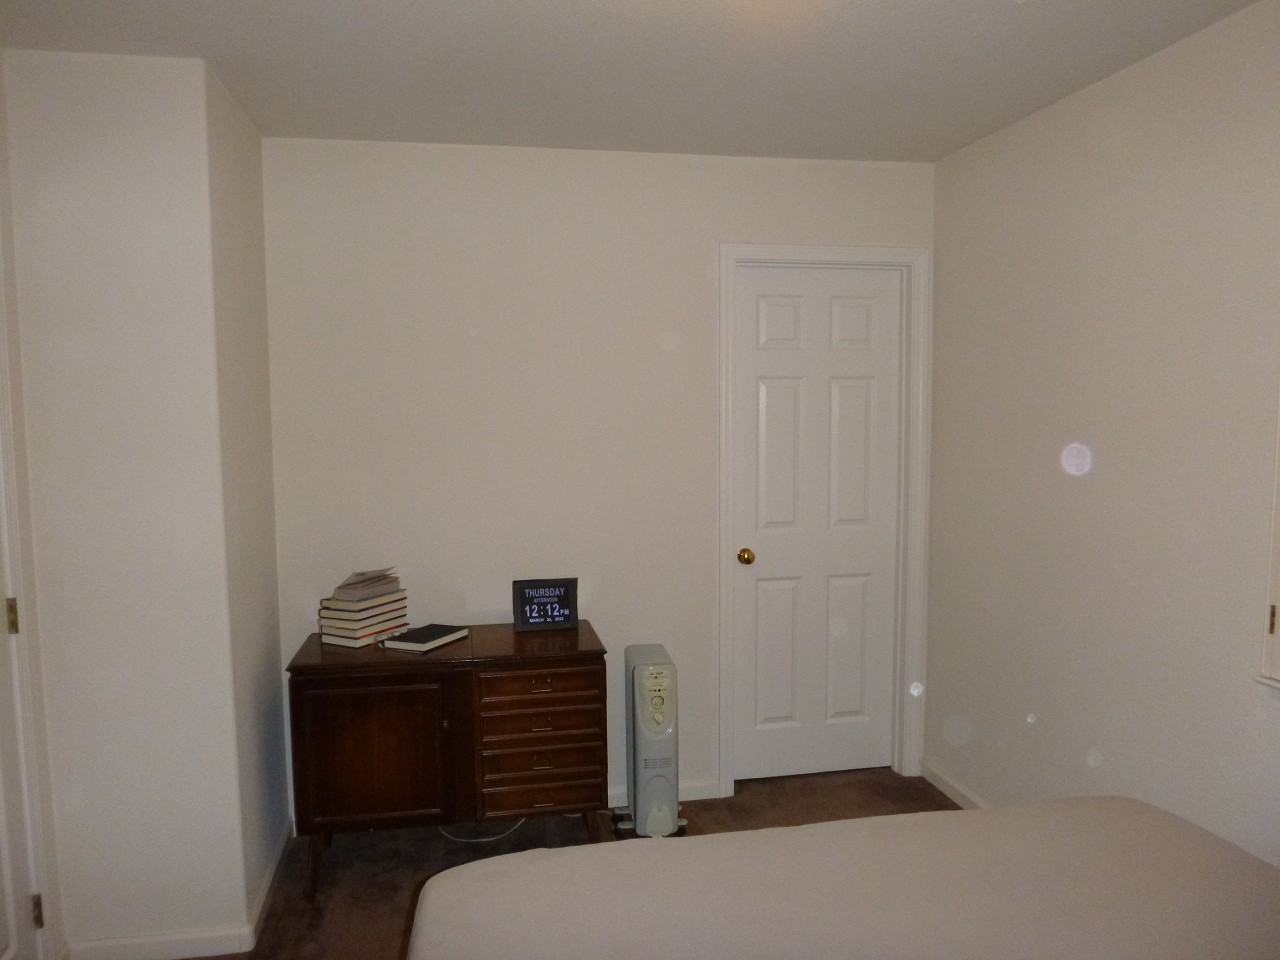 Upstairs spare bedroom (56)